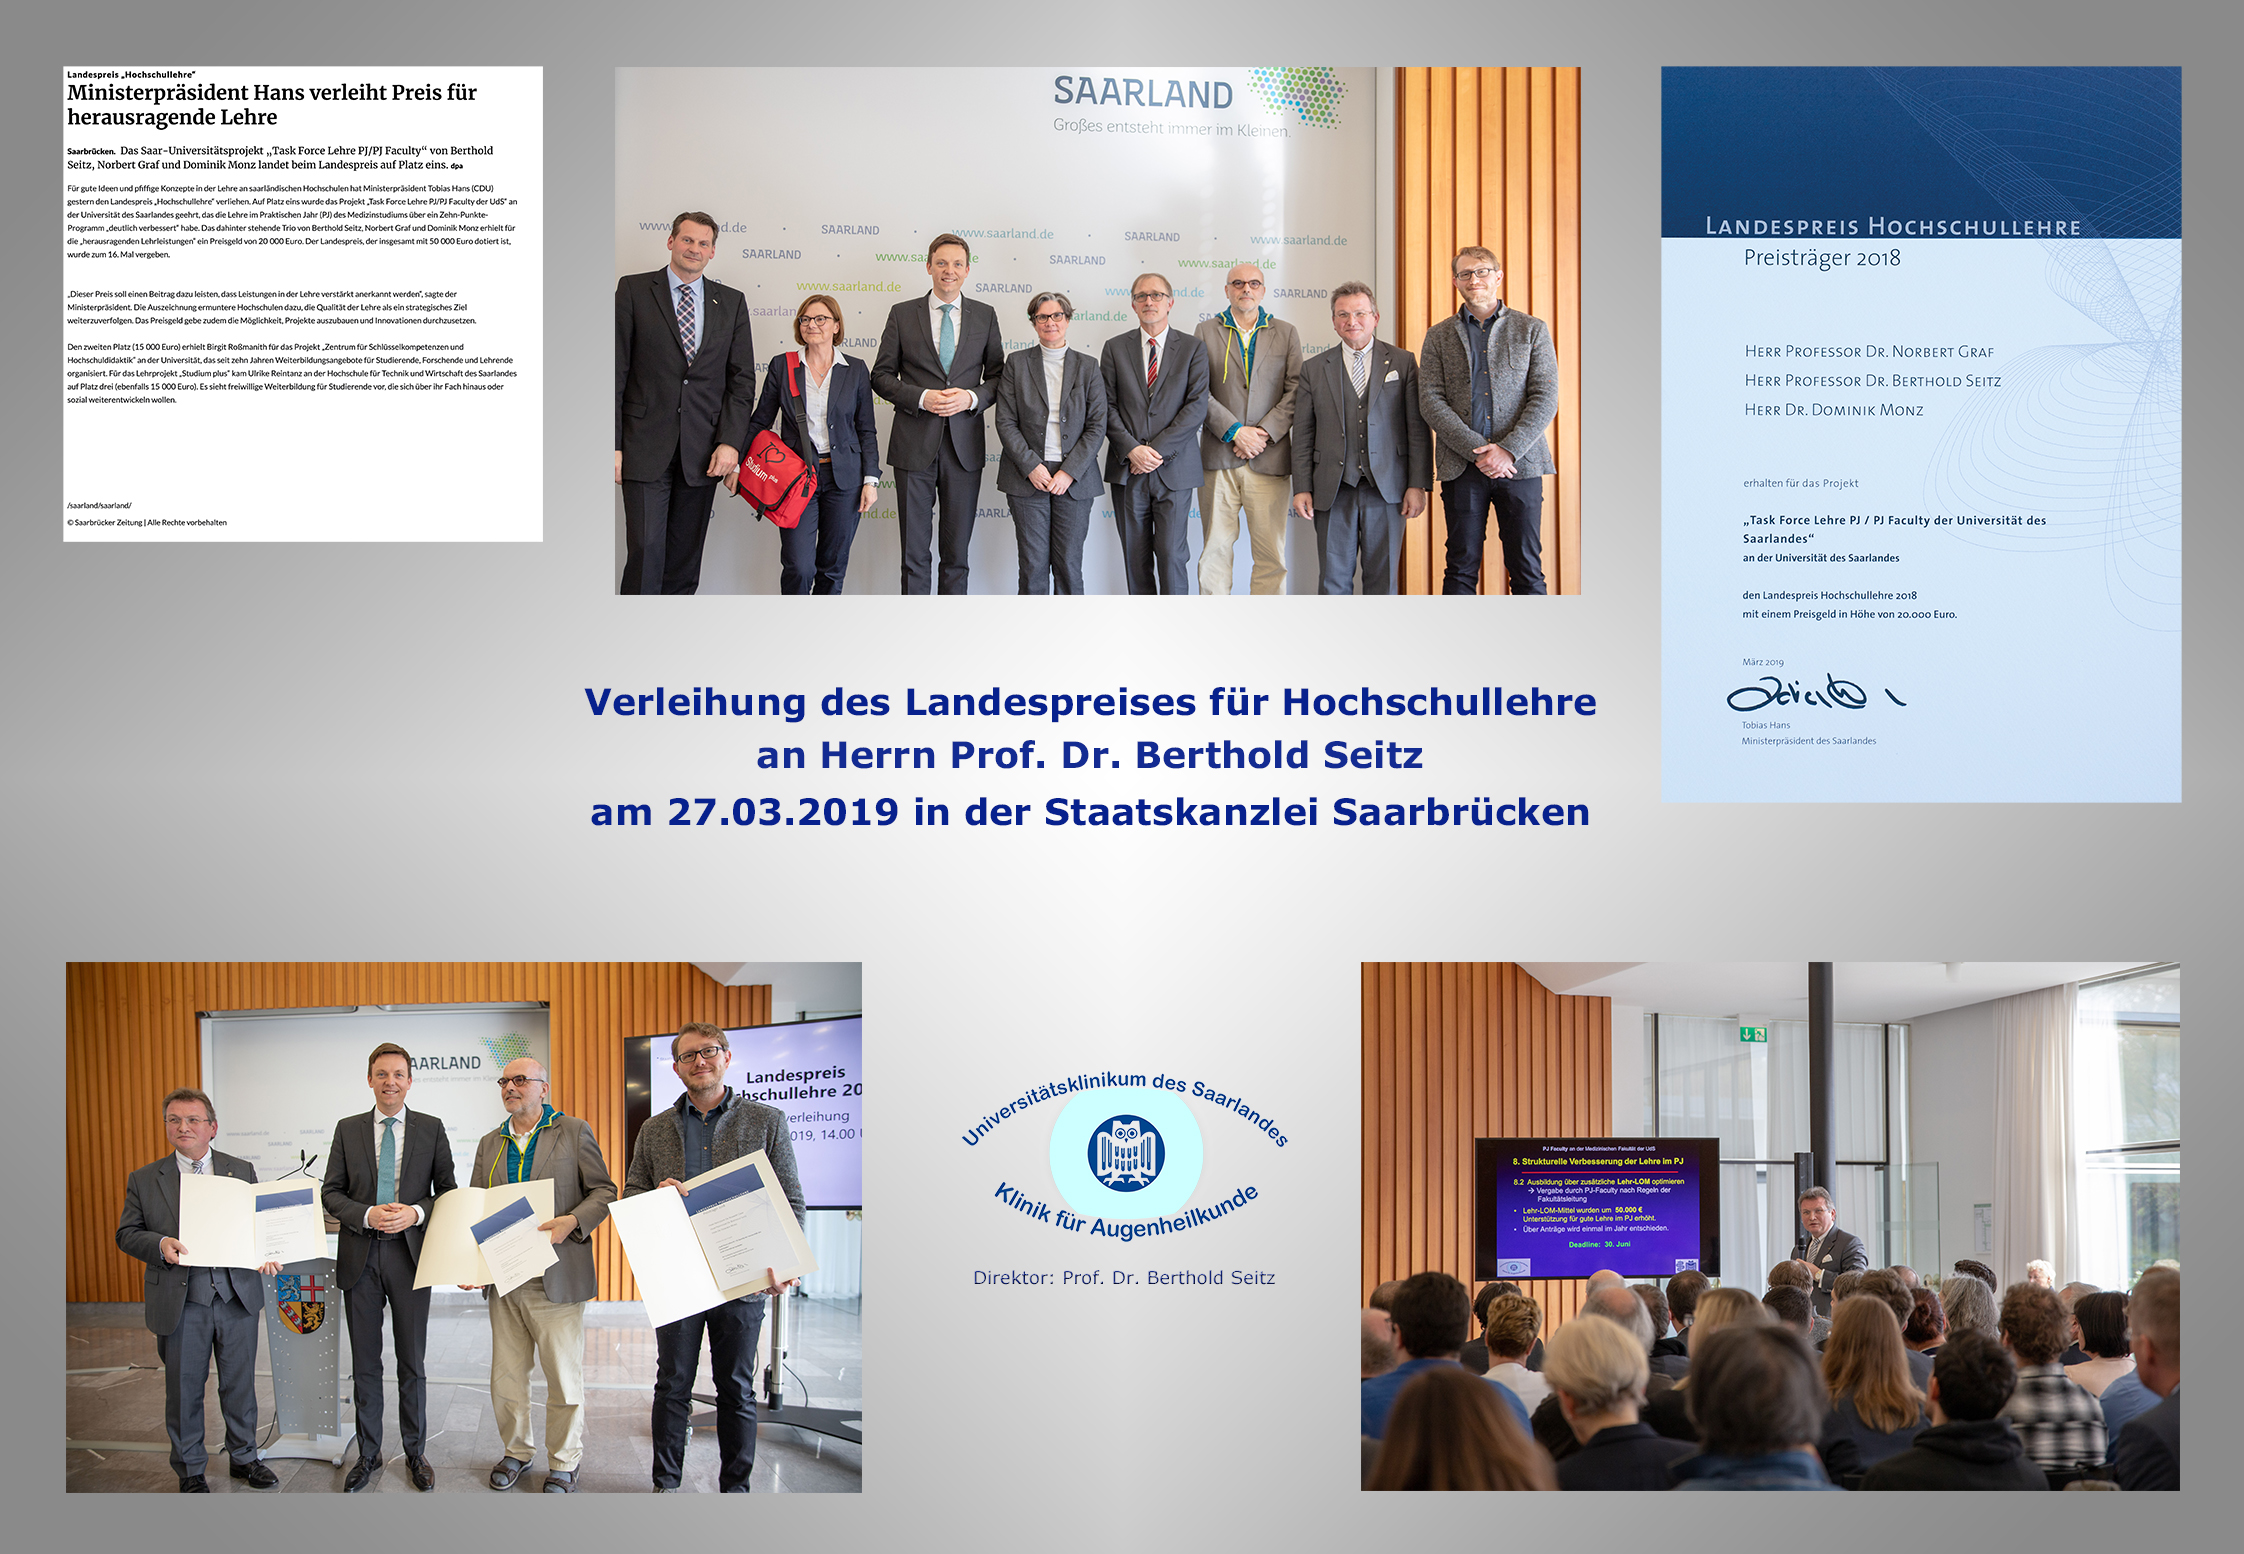 Innovative teaching concepts of the medical faculty awarded